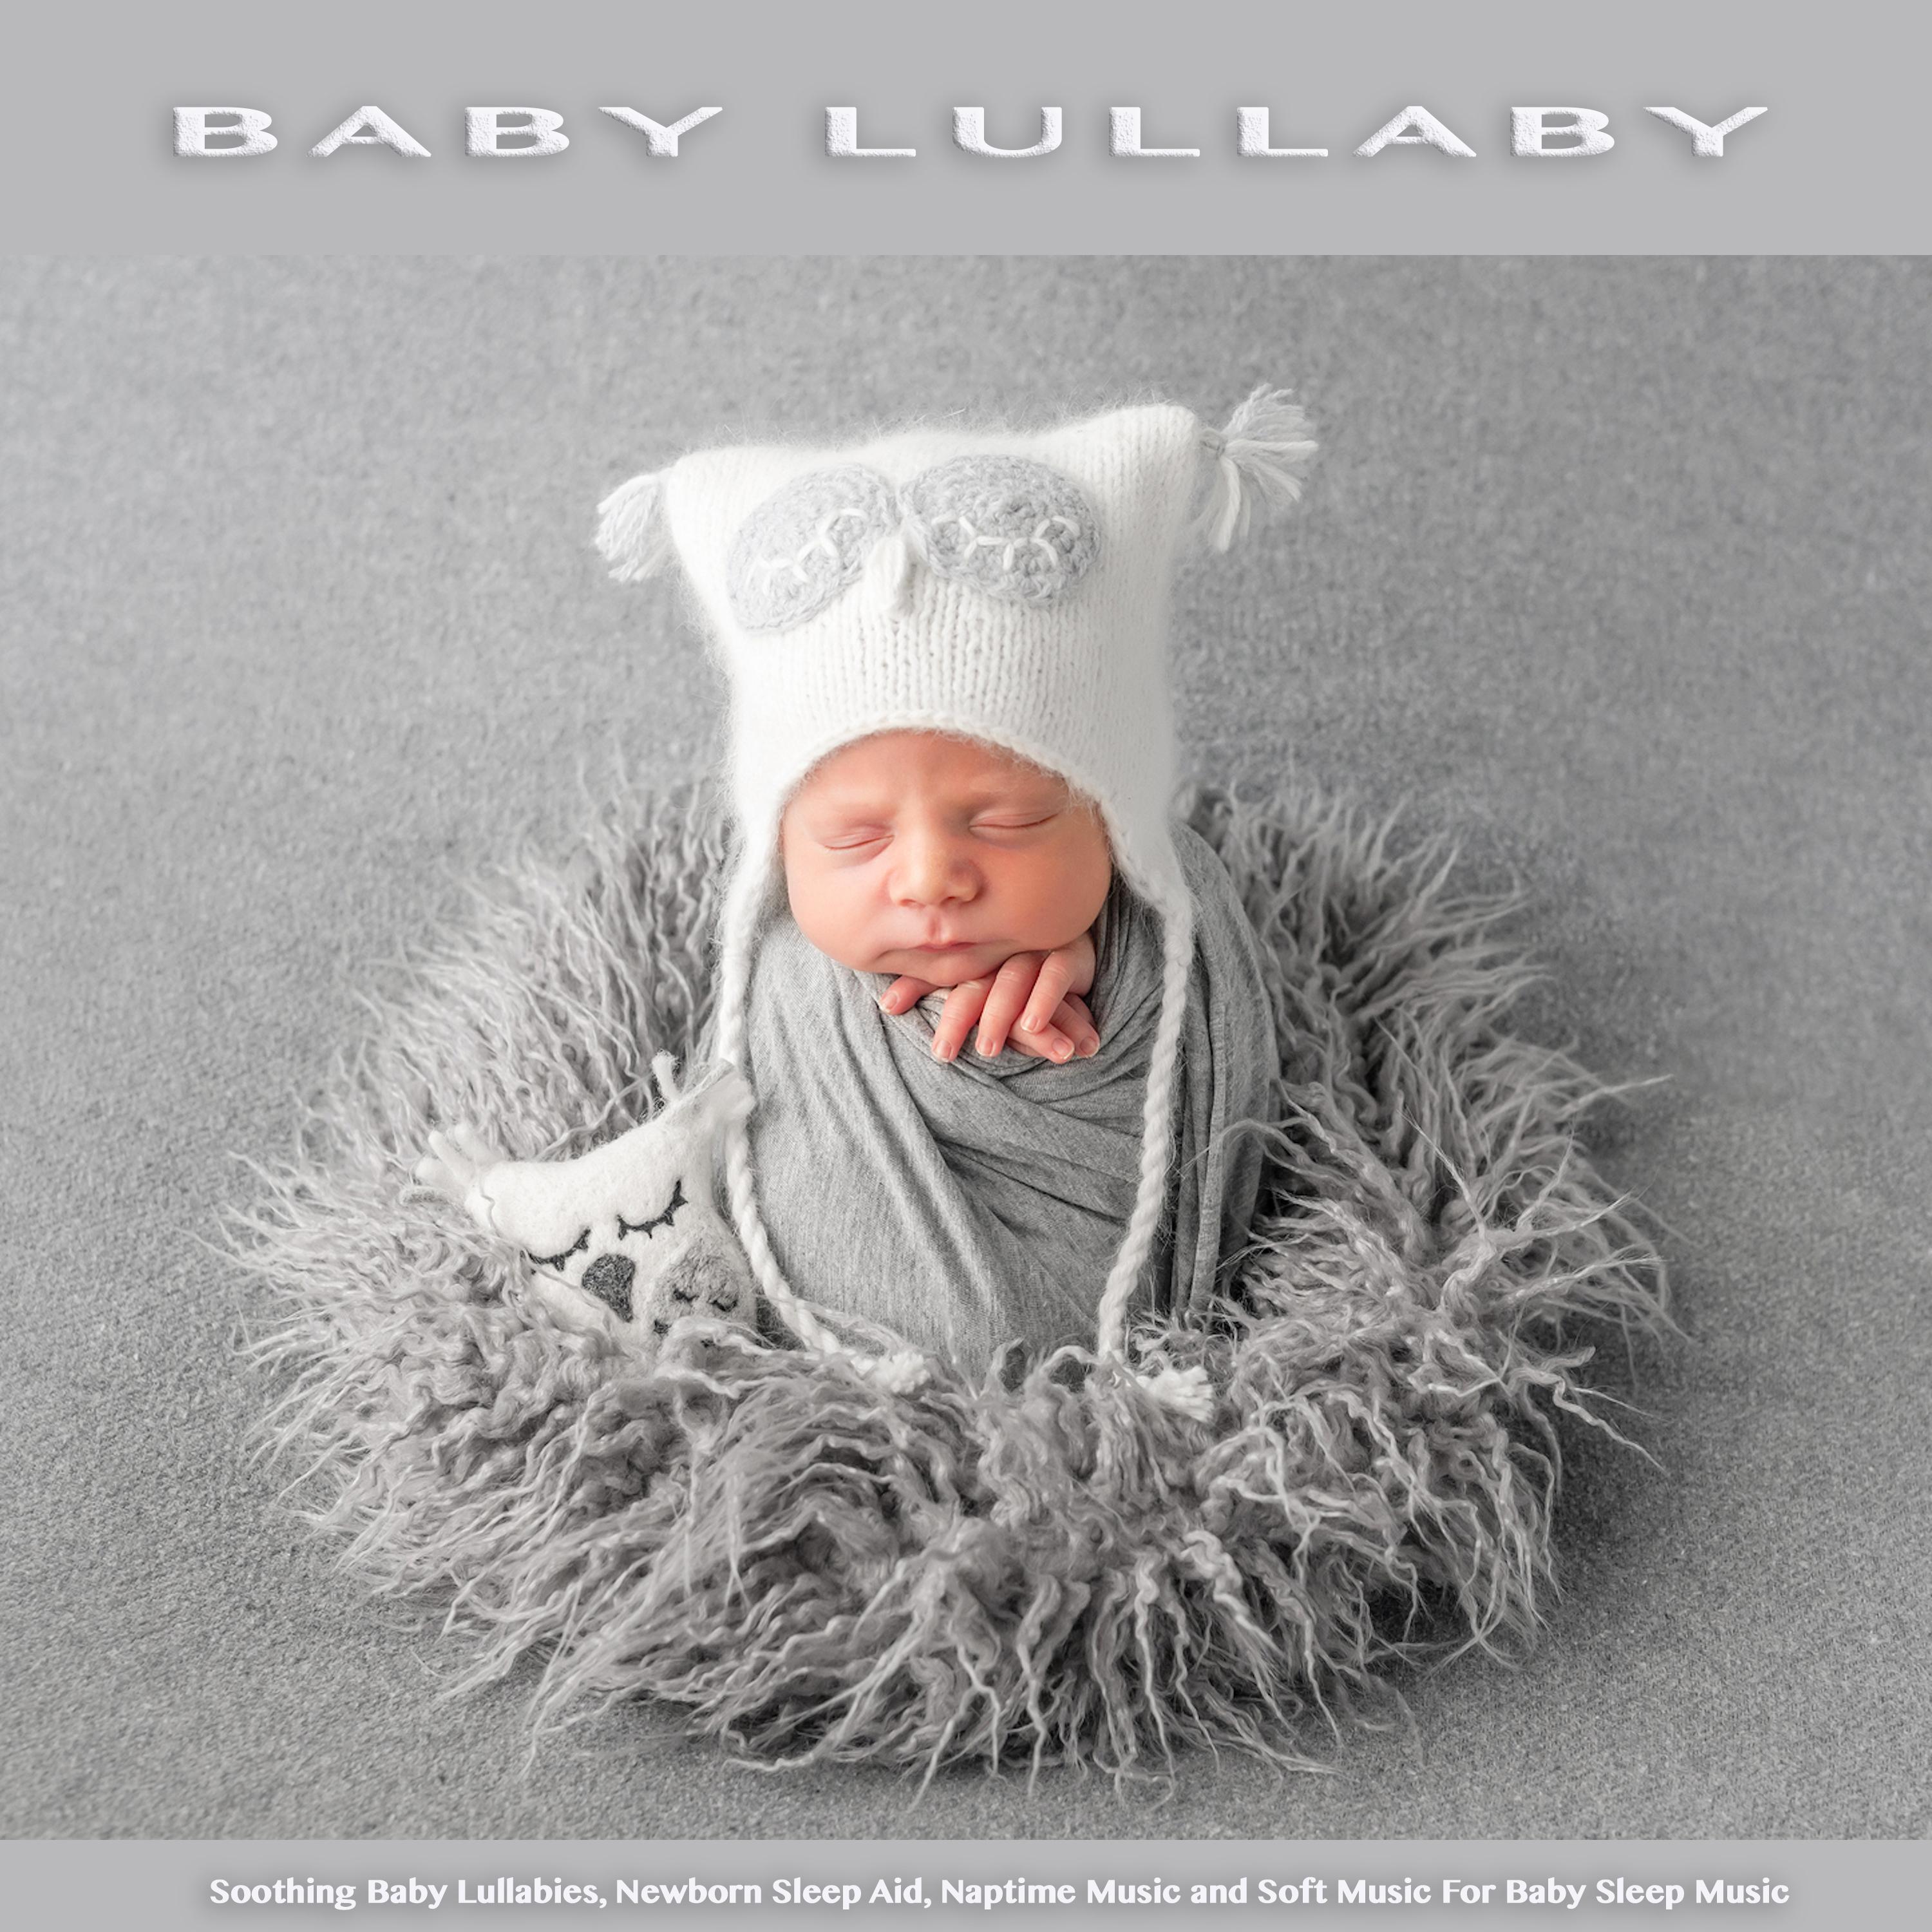 Baby Lullaby: Soothing Baby Lullabies, Newborn Sleep Aid, Naptime Music and Soft Music For Baby Sleep Music